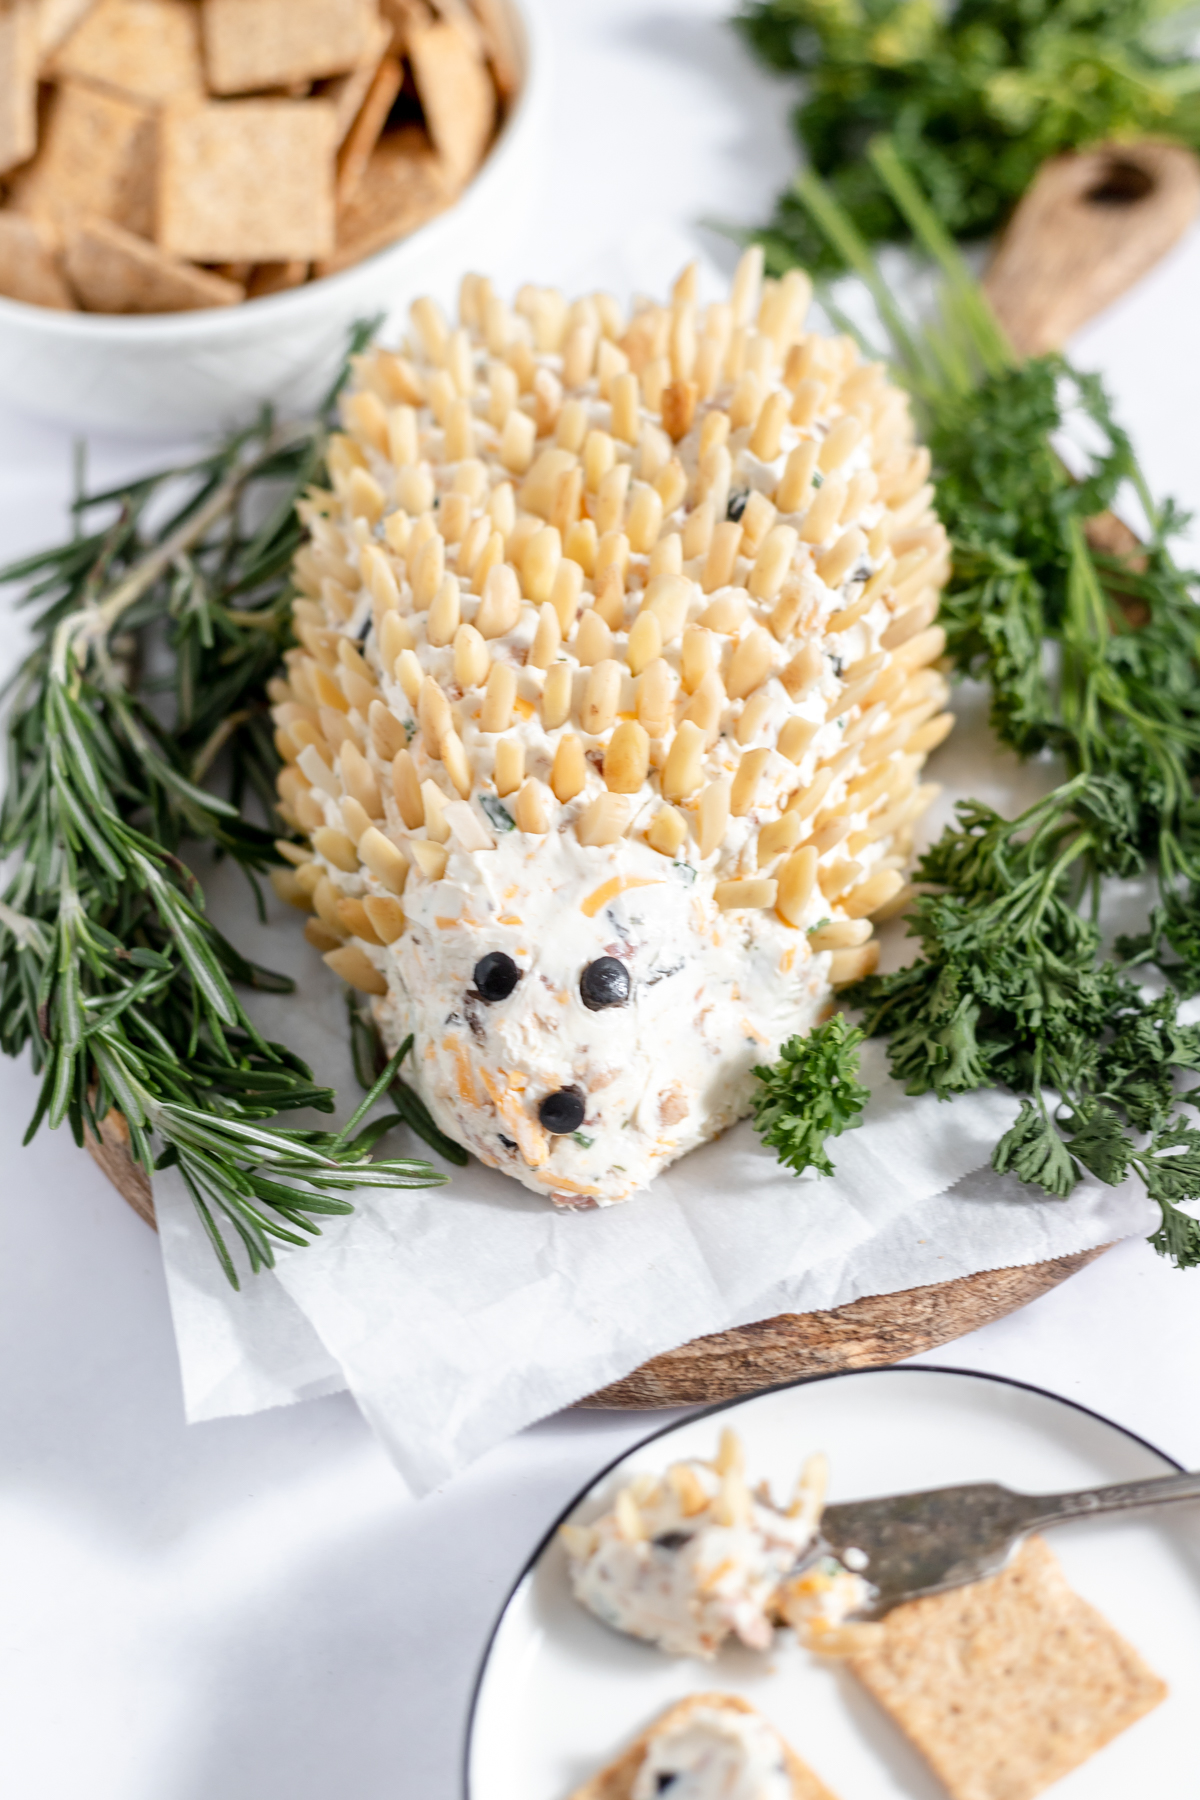 An oblong cheeseball in the shape of a hedgehog with slivered almond spikes all over.